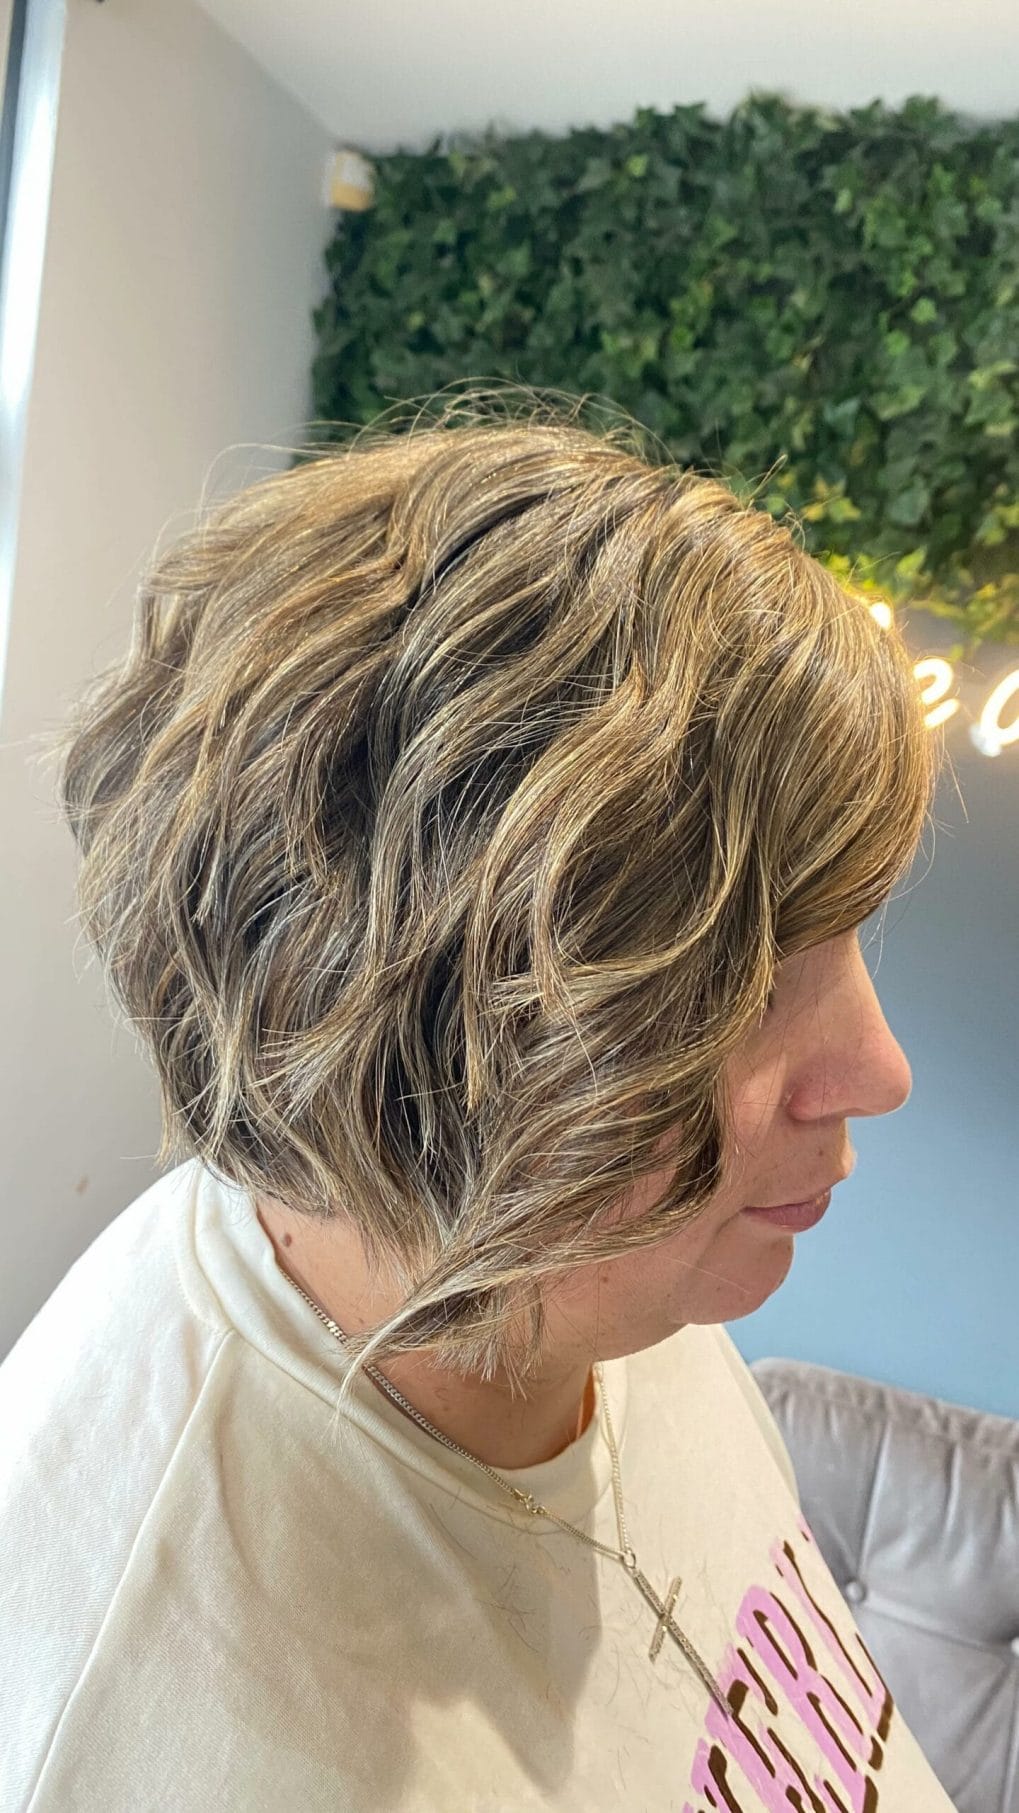 Relaxed wavy pixie bob with light and dark blonde highlights for a sun-kissed beachy feel